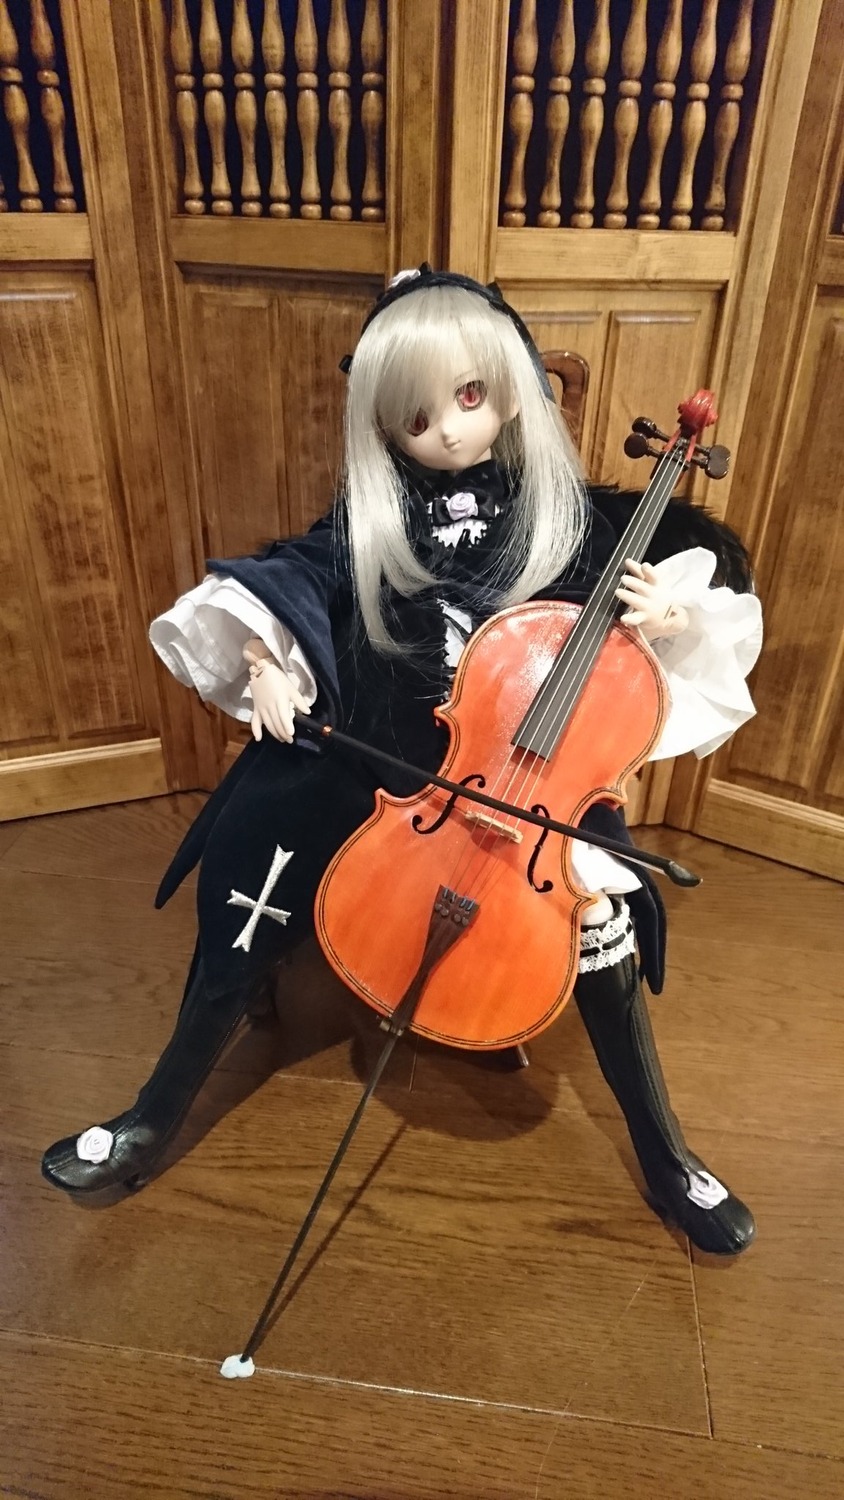 1girl bass_guitar bow_(instrument) doll dress electric_guitar gothic_lolita guitar hairband instrument lolita_fashion long_hair mary_janes piano playing_instrument plectrum red_eyes rose sheet_music sitting solo suigintou violin wooden_floor